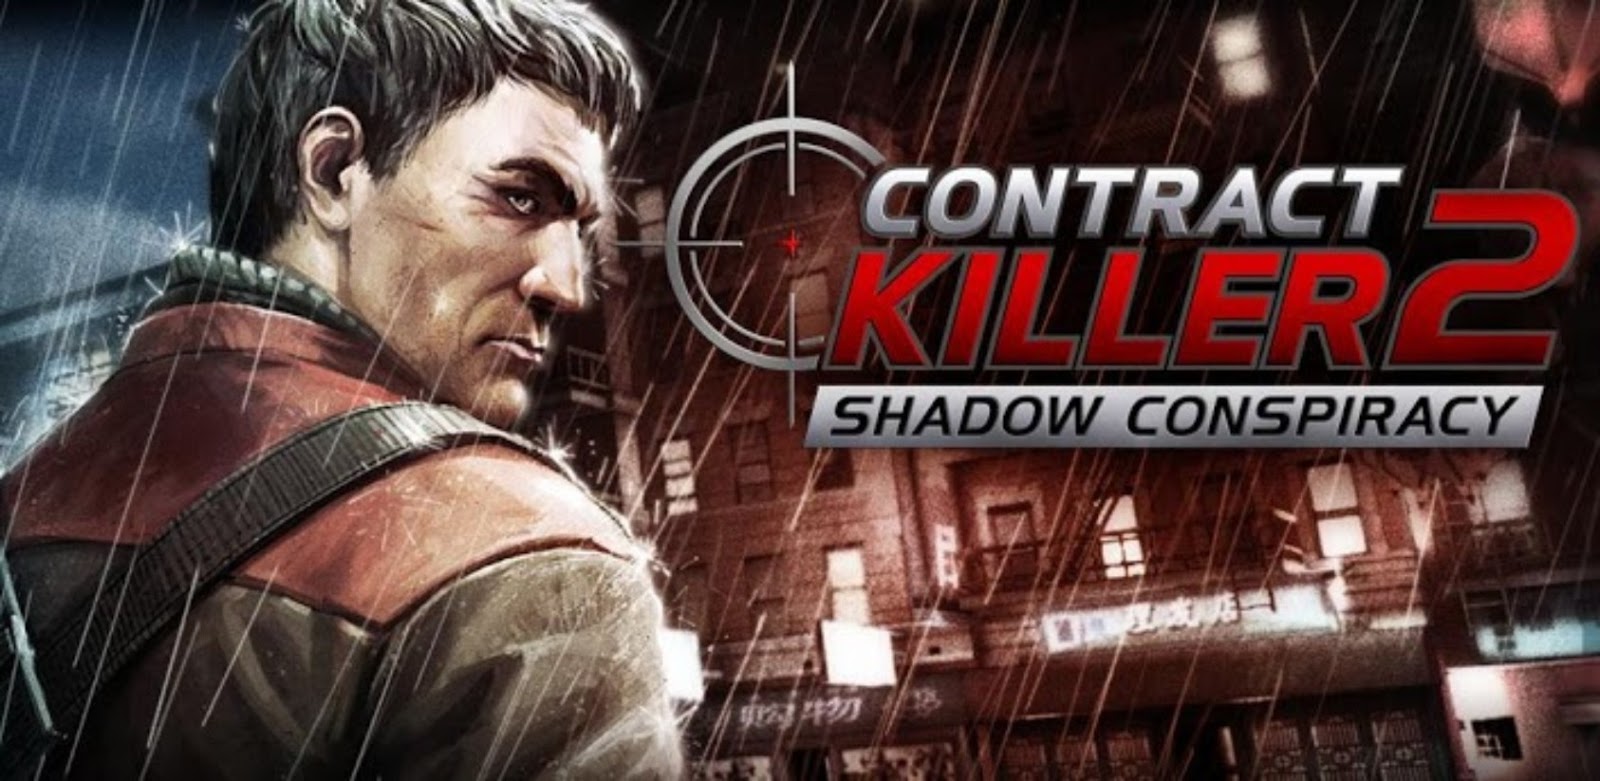 Free Download CONTRACT KILLER 2 v1.1.2 Apk + SD Data for Android